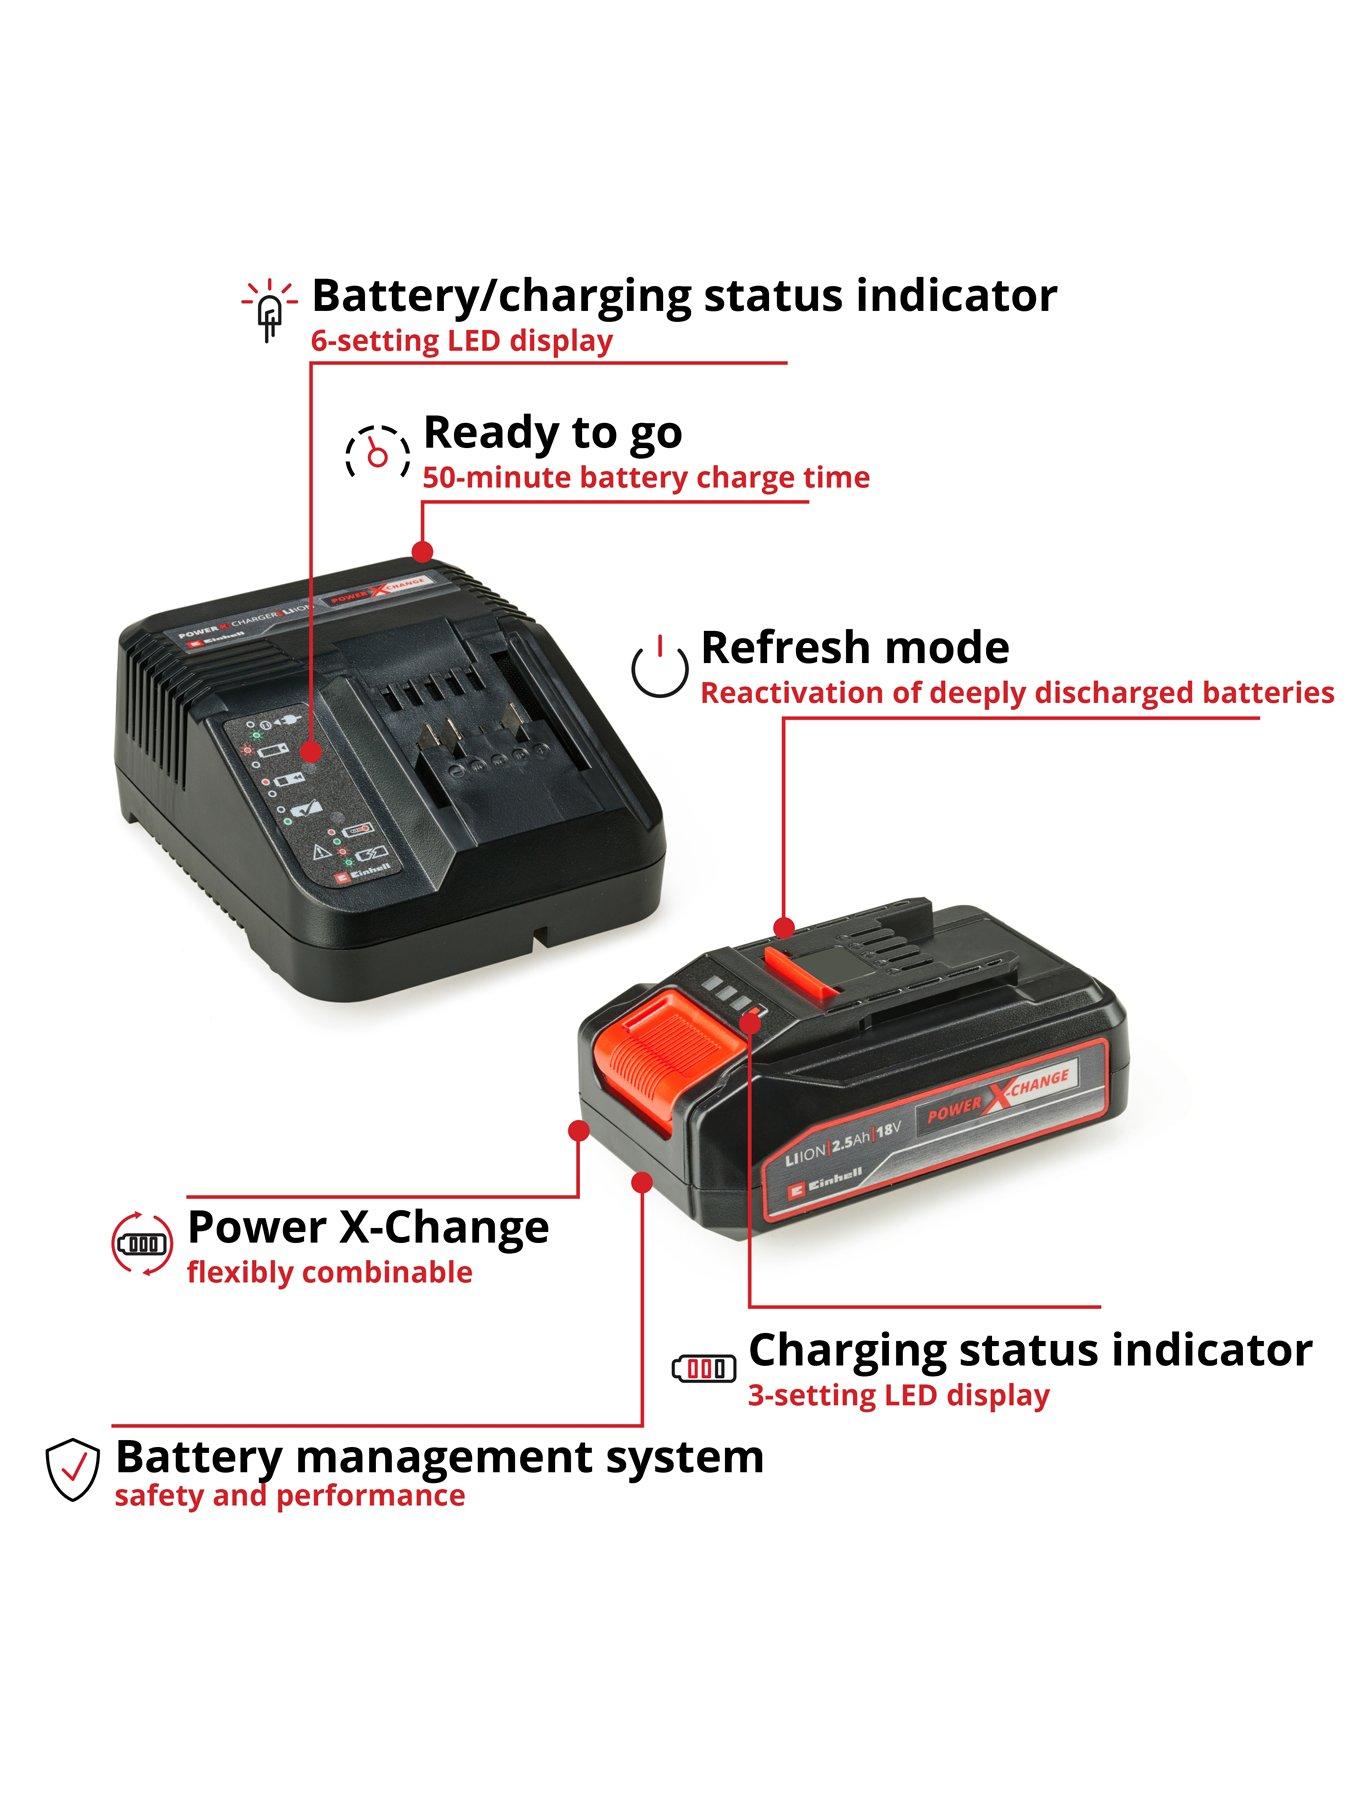 Kit chargeur + batterie Einhell